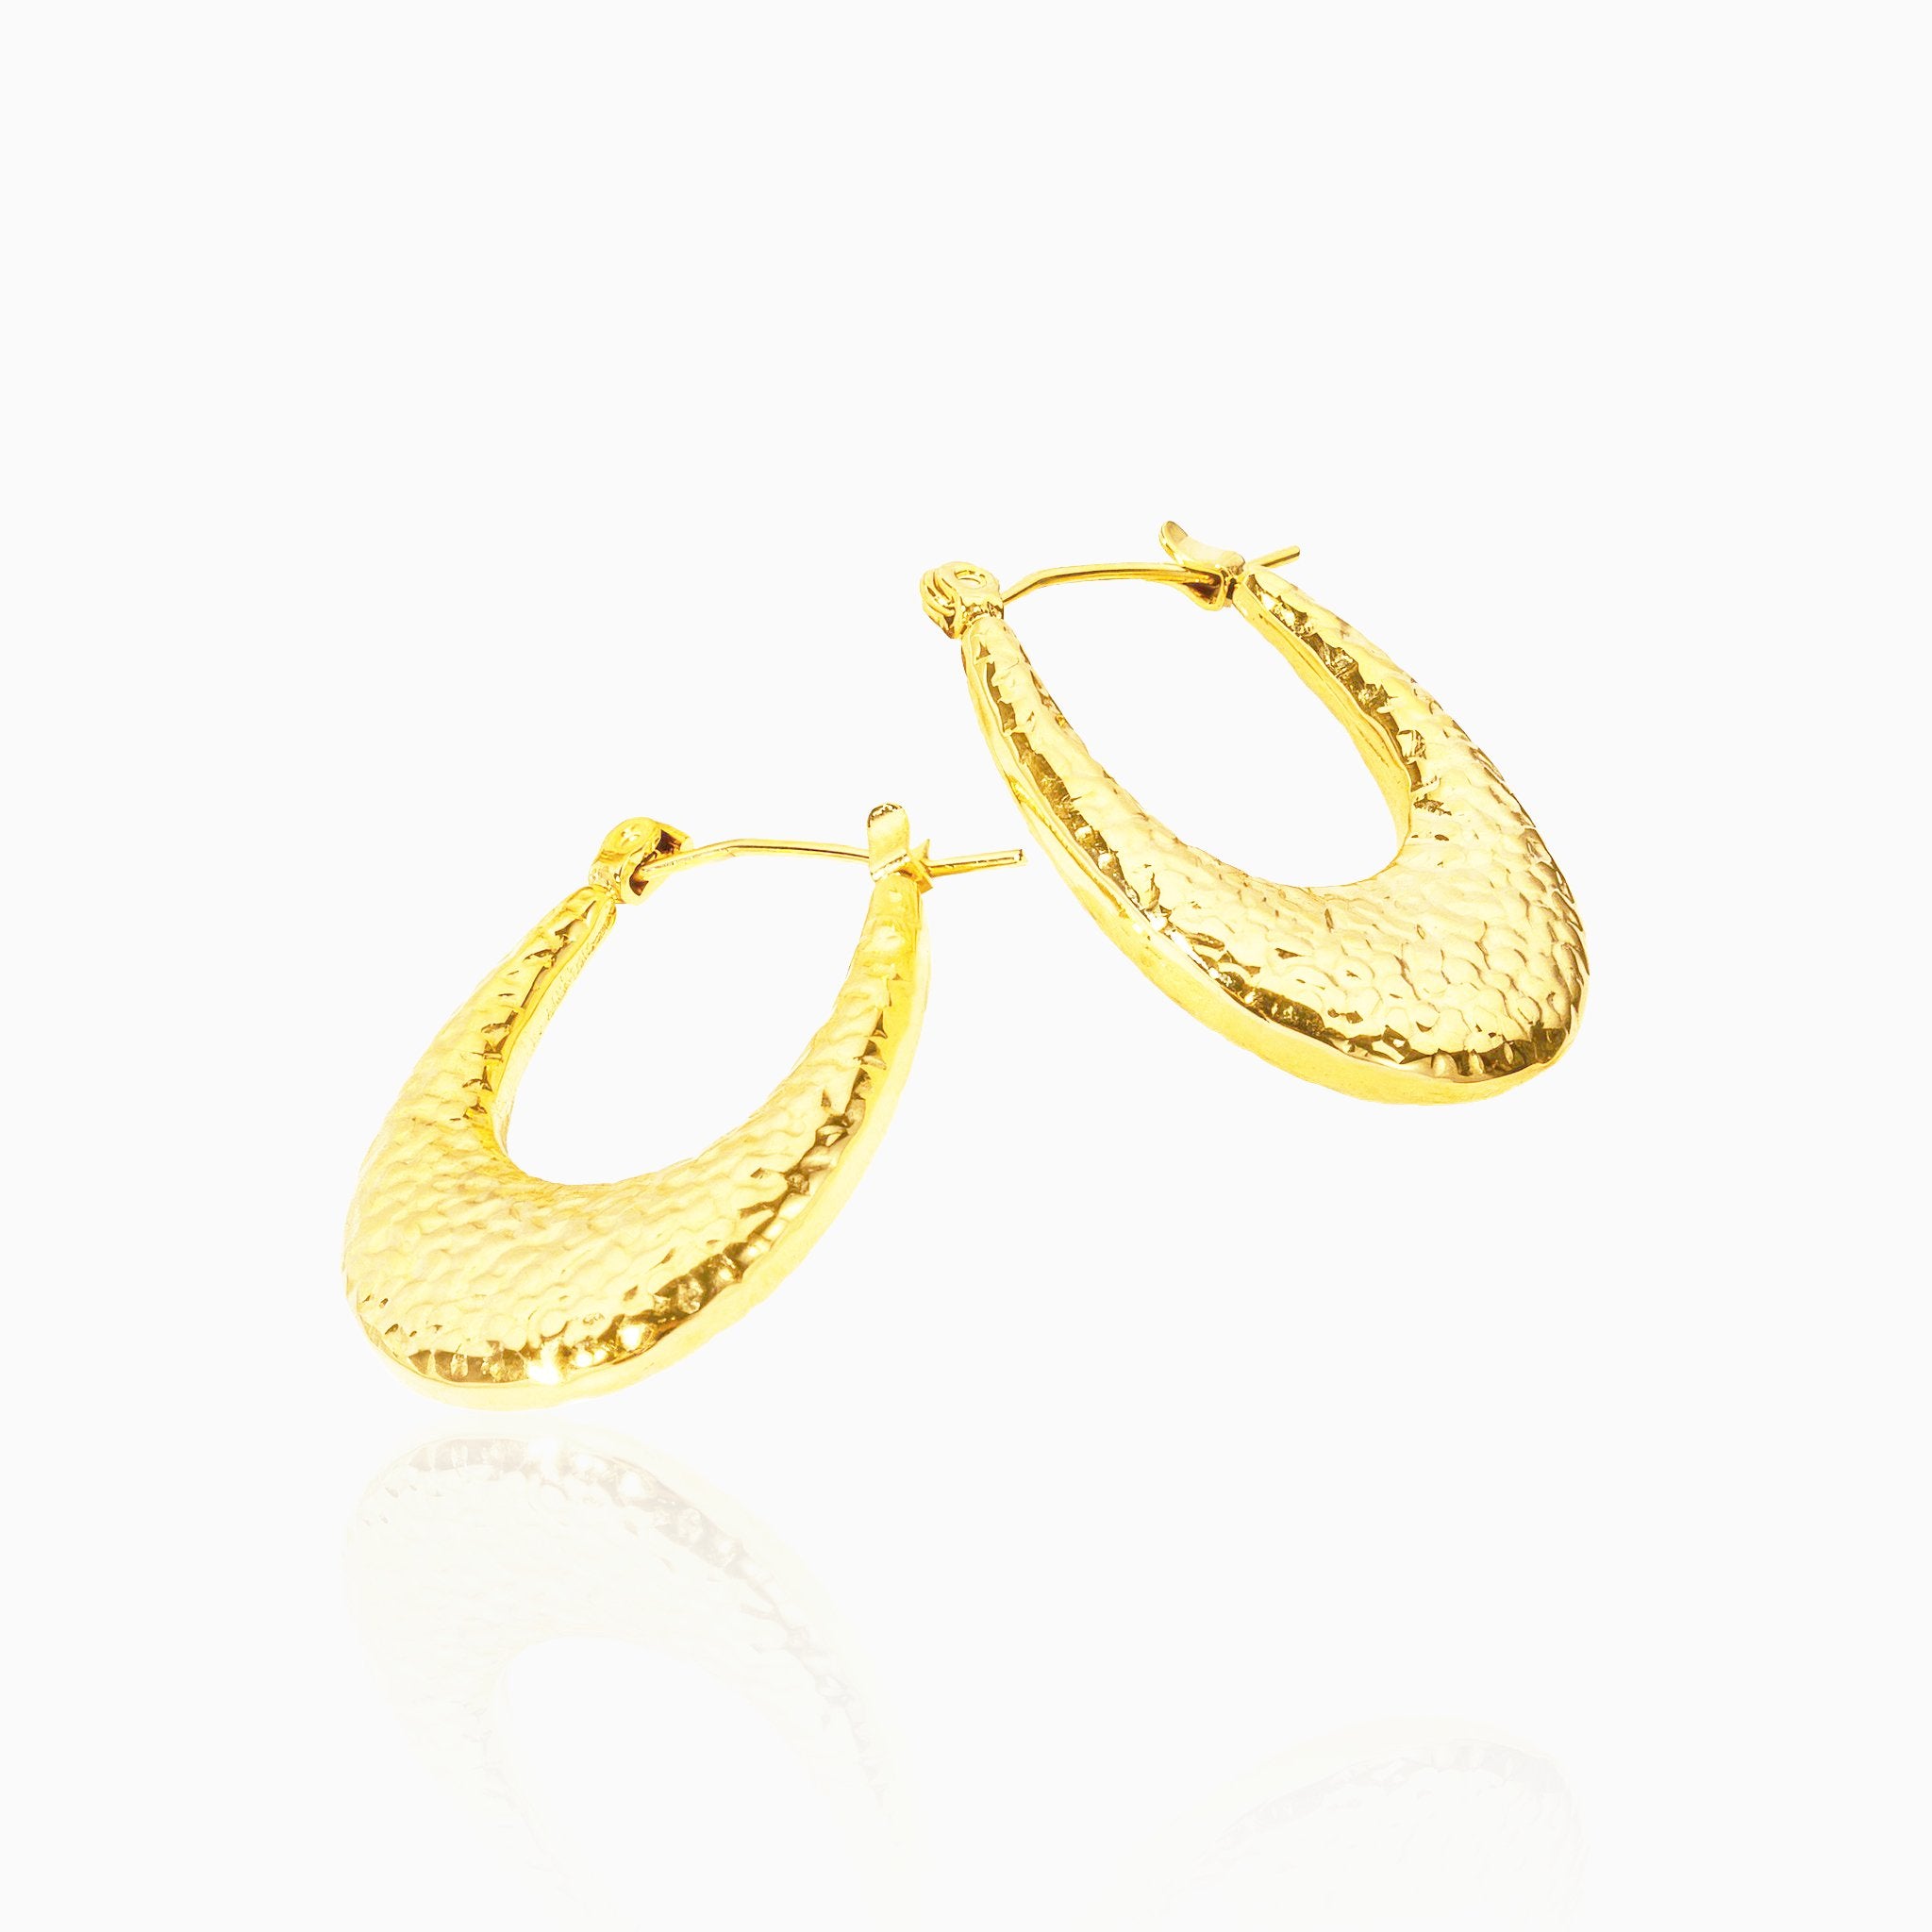 U-Shaped Earrings with Lava Pattern - Nobbier - Earrings - 18K Gold And Titanium PVD Coated Jewelry